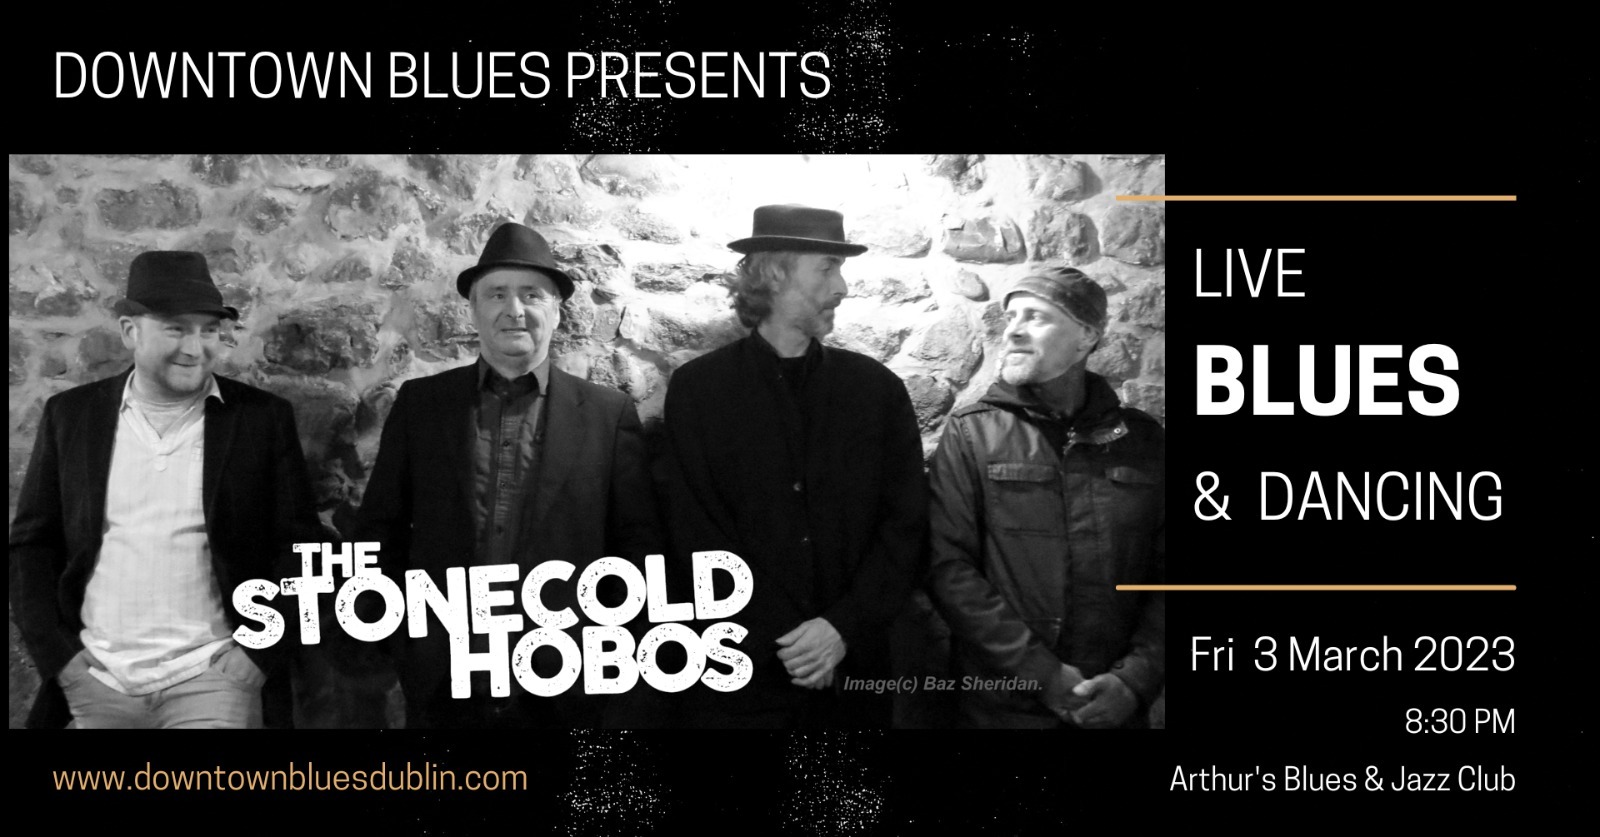 DTB Live Blues & Dancing with The Stonecold Hobos